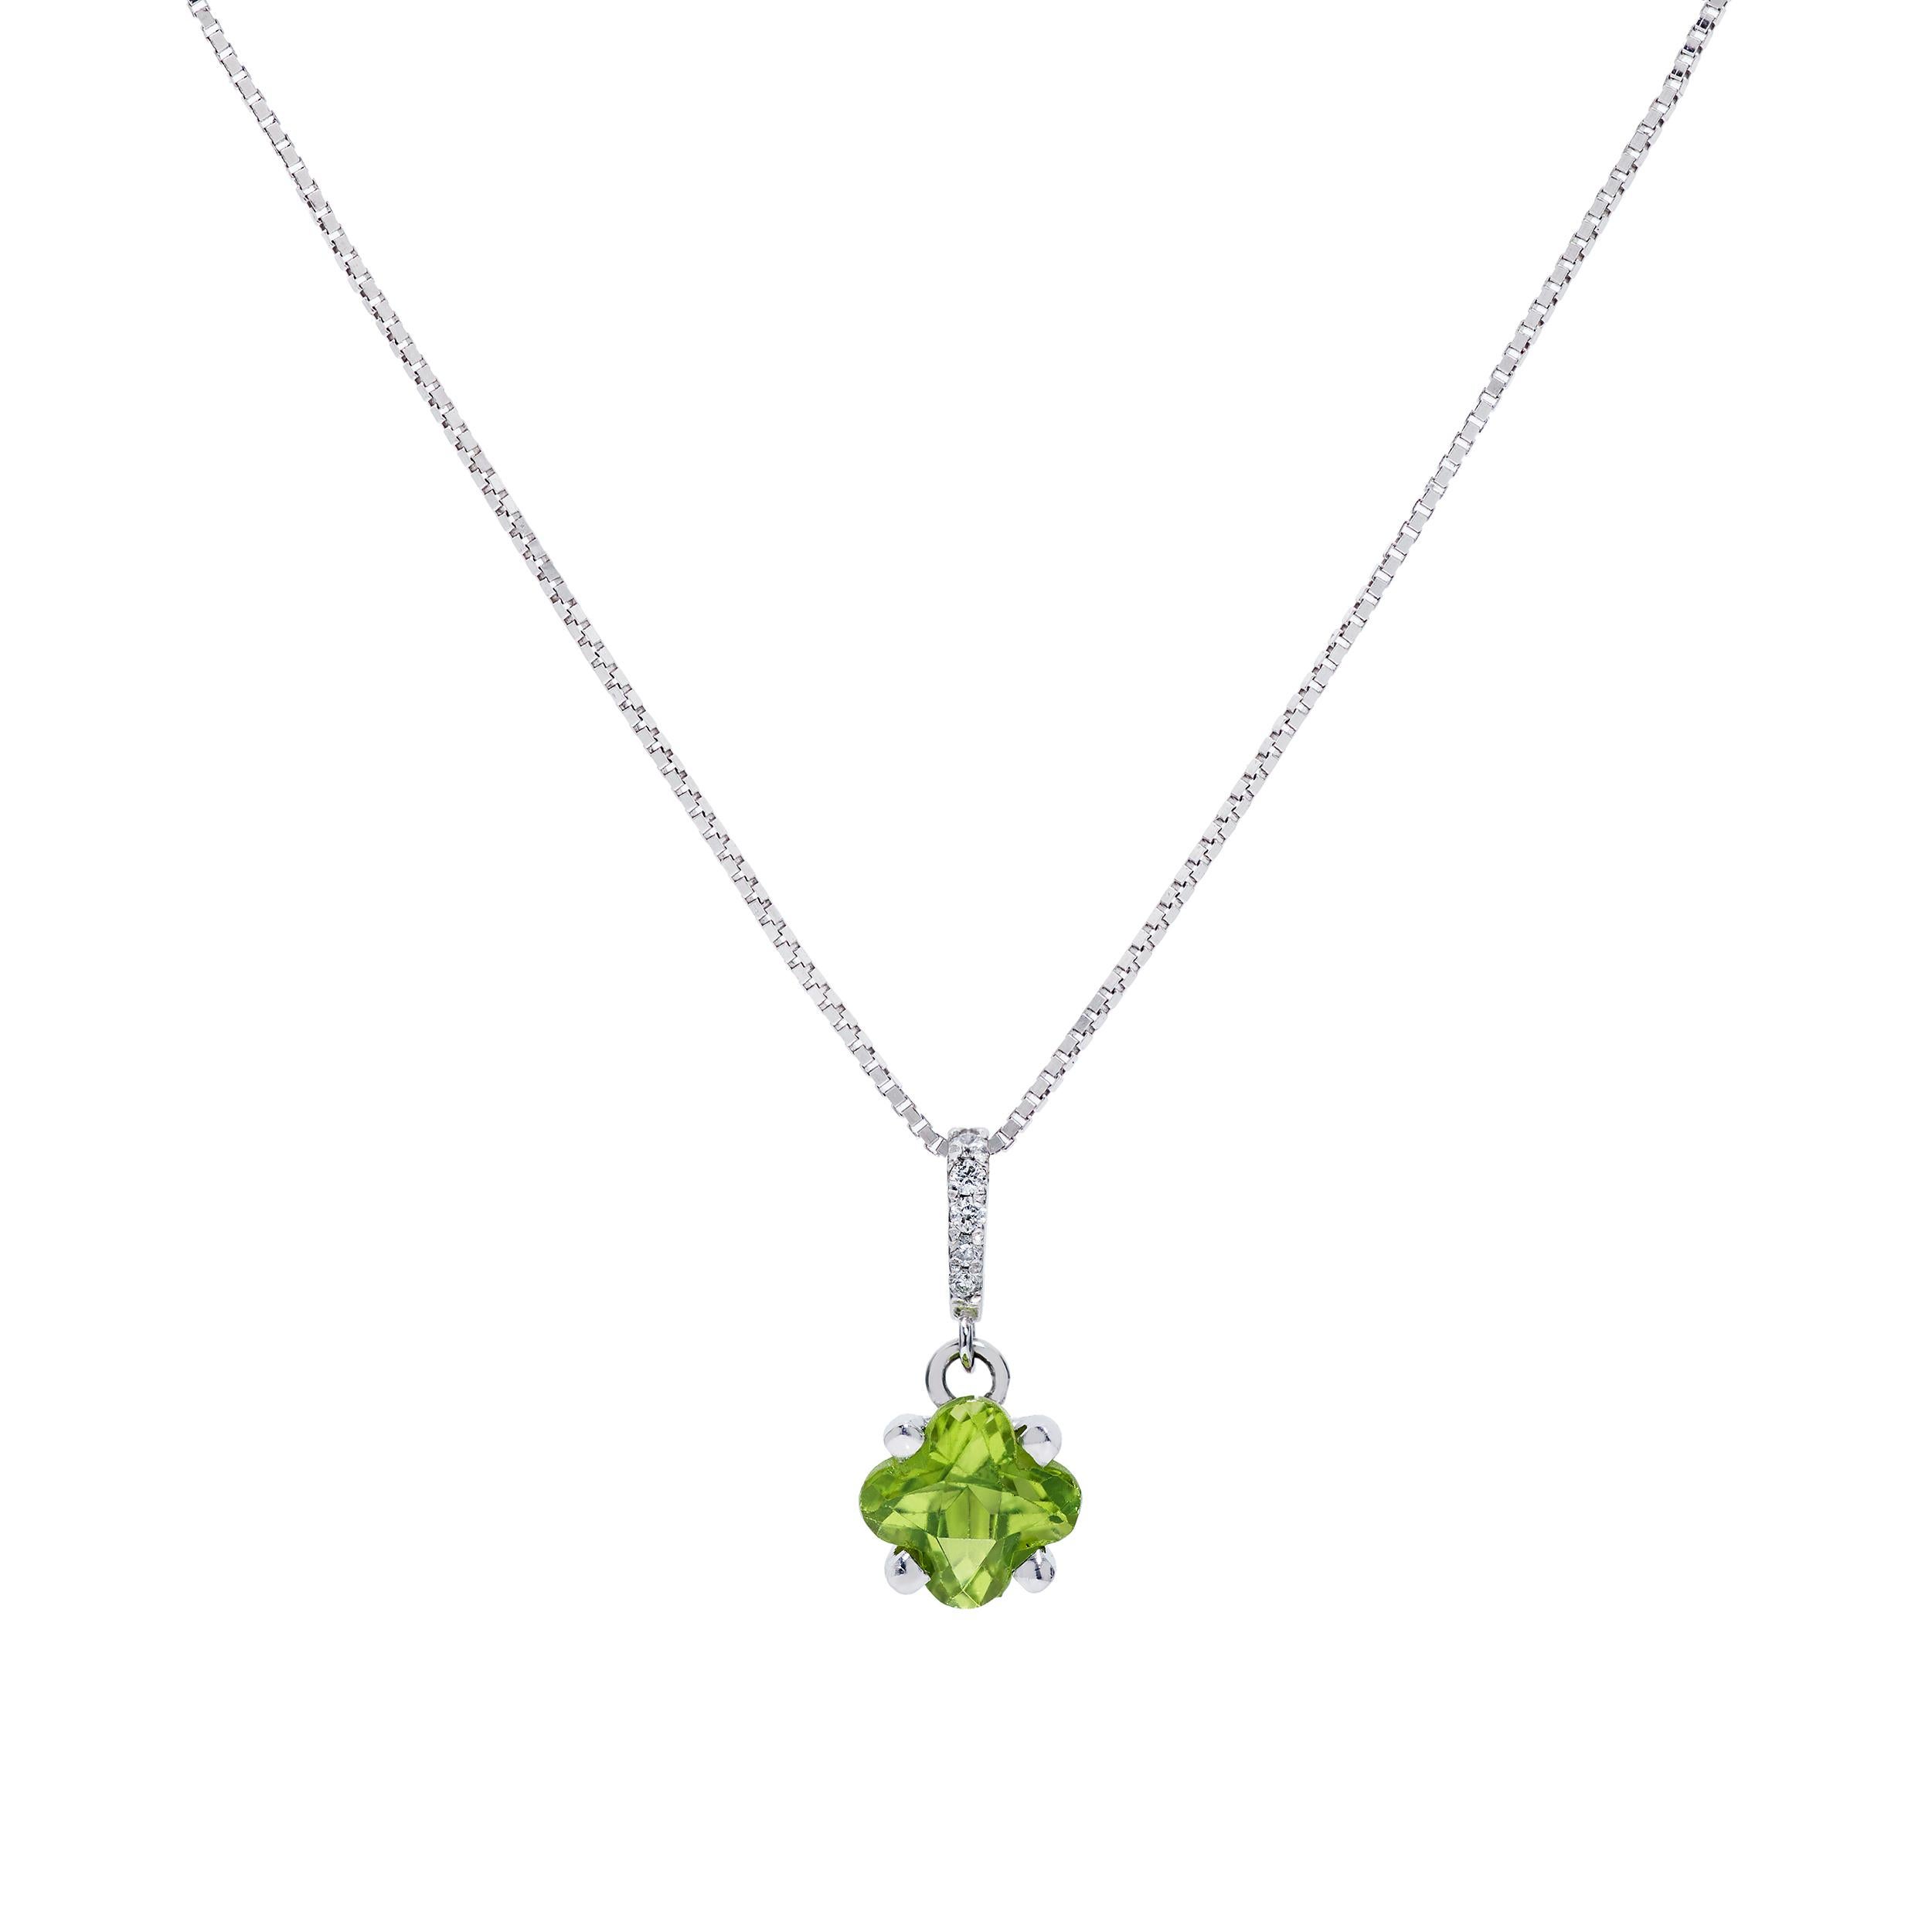 2.46 carats flower shaped Peridot & Diamond necklace set in 18 karat white gold

Pendant Features
     Clover-shaped Peridot weighing 0.88 Cts
     
Earrings Feature
     2 Clover-shaped Peridot weighing 1.58 Cts 